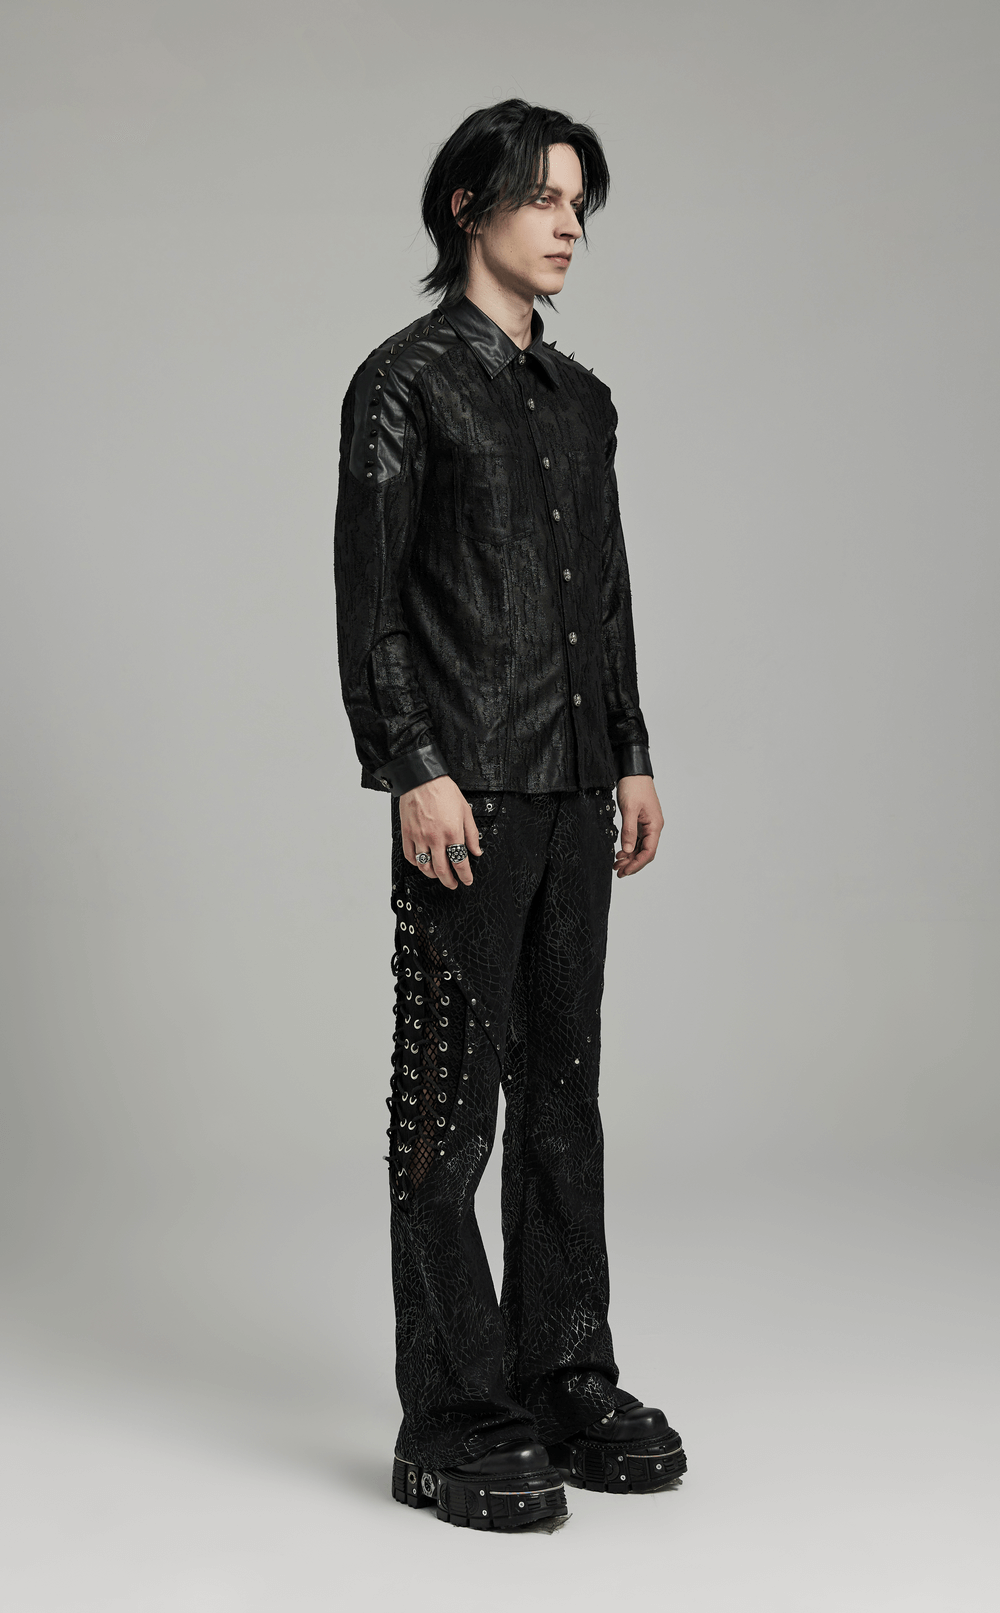 Edgy Men's Textured Black Shirt with Sleeves Studs